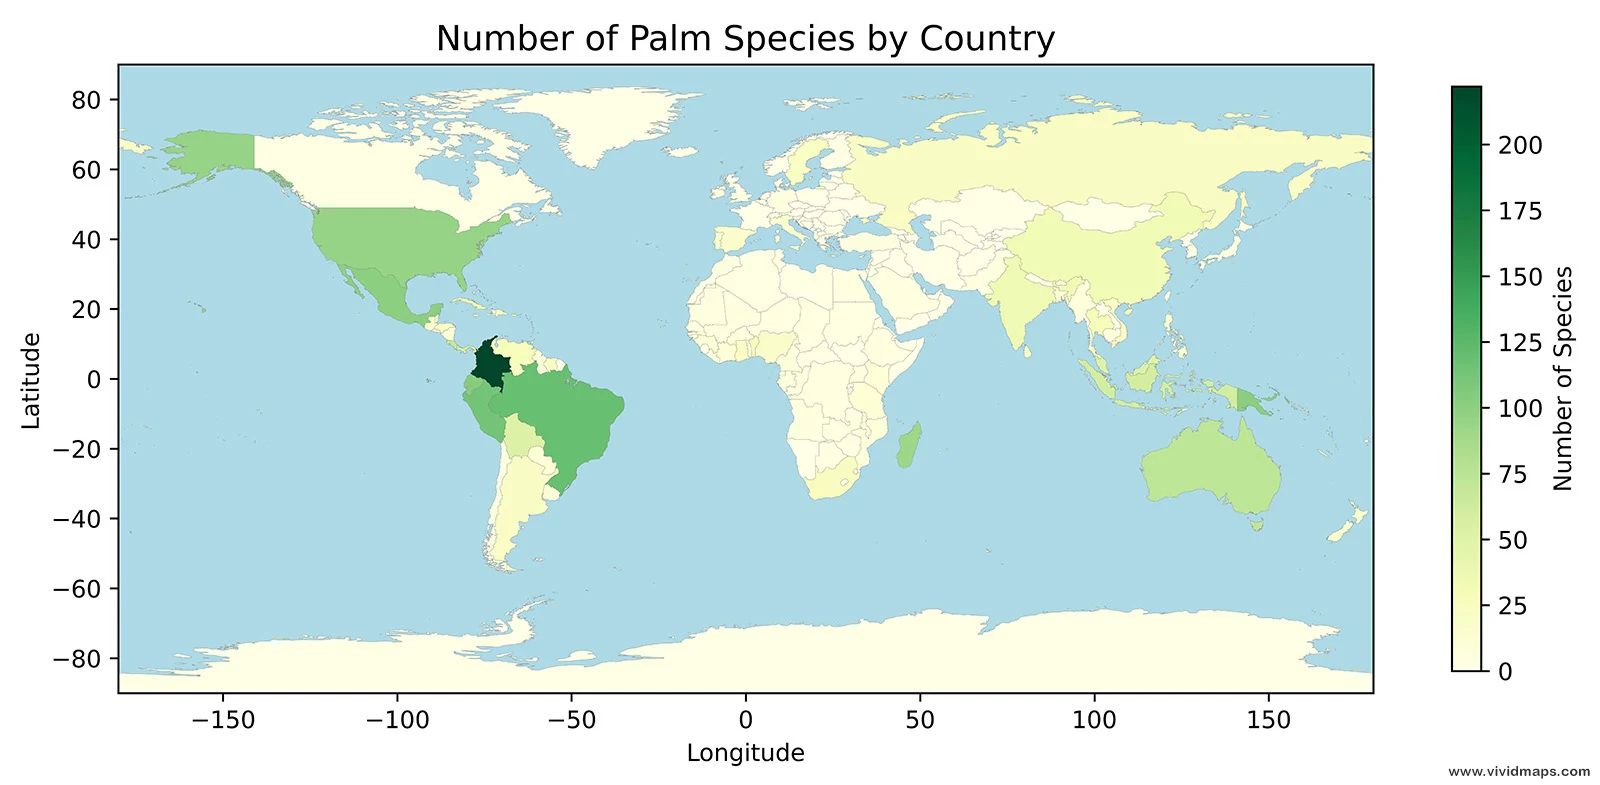 Which country has the most palm species?